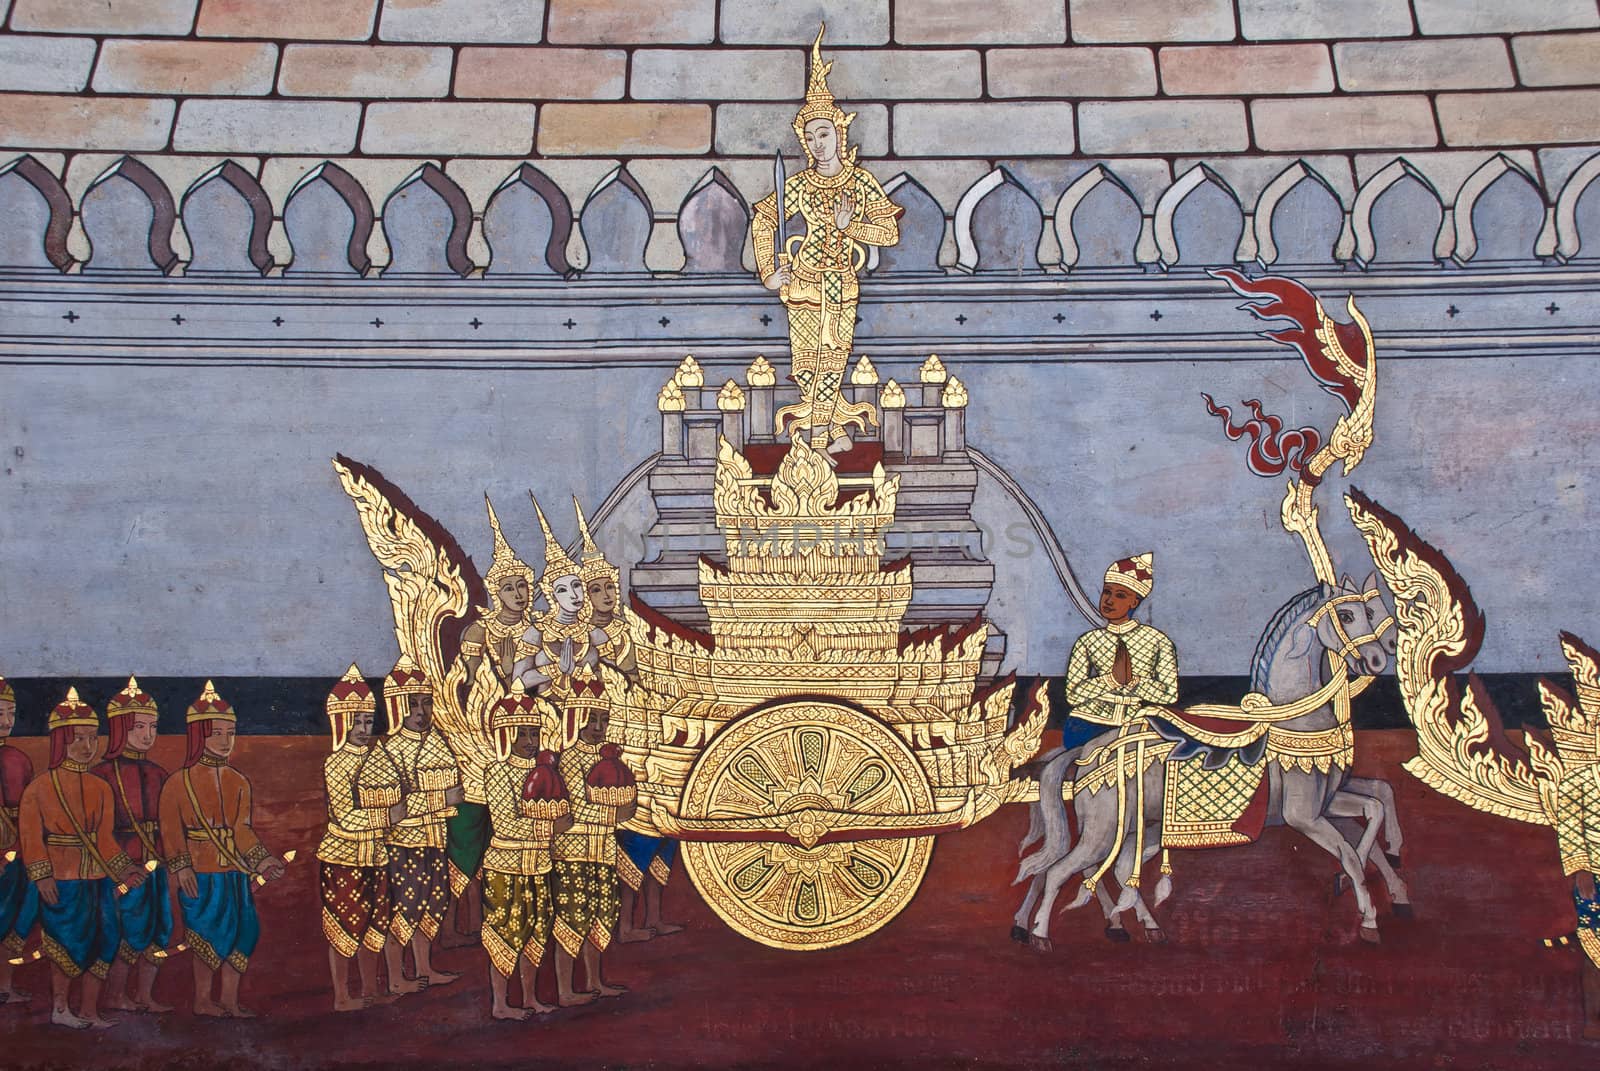 Thai temple mural in the ground of Wat Phra Kaeo at the Grand Palace, Bangkok, Thailand.